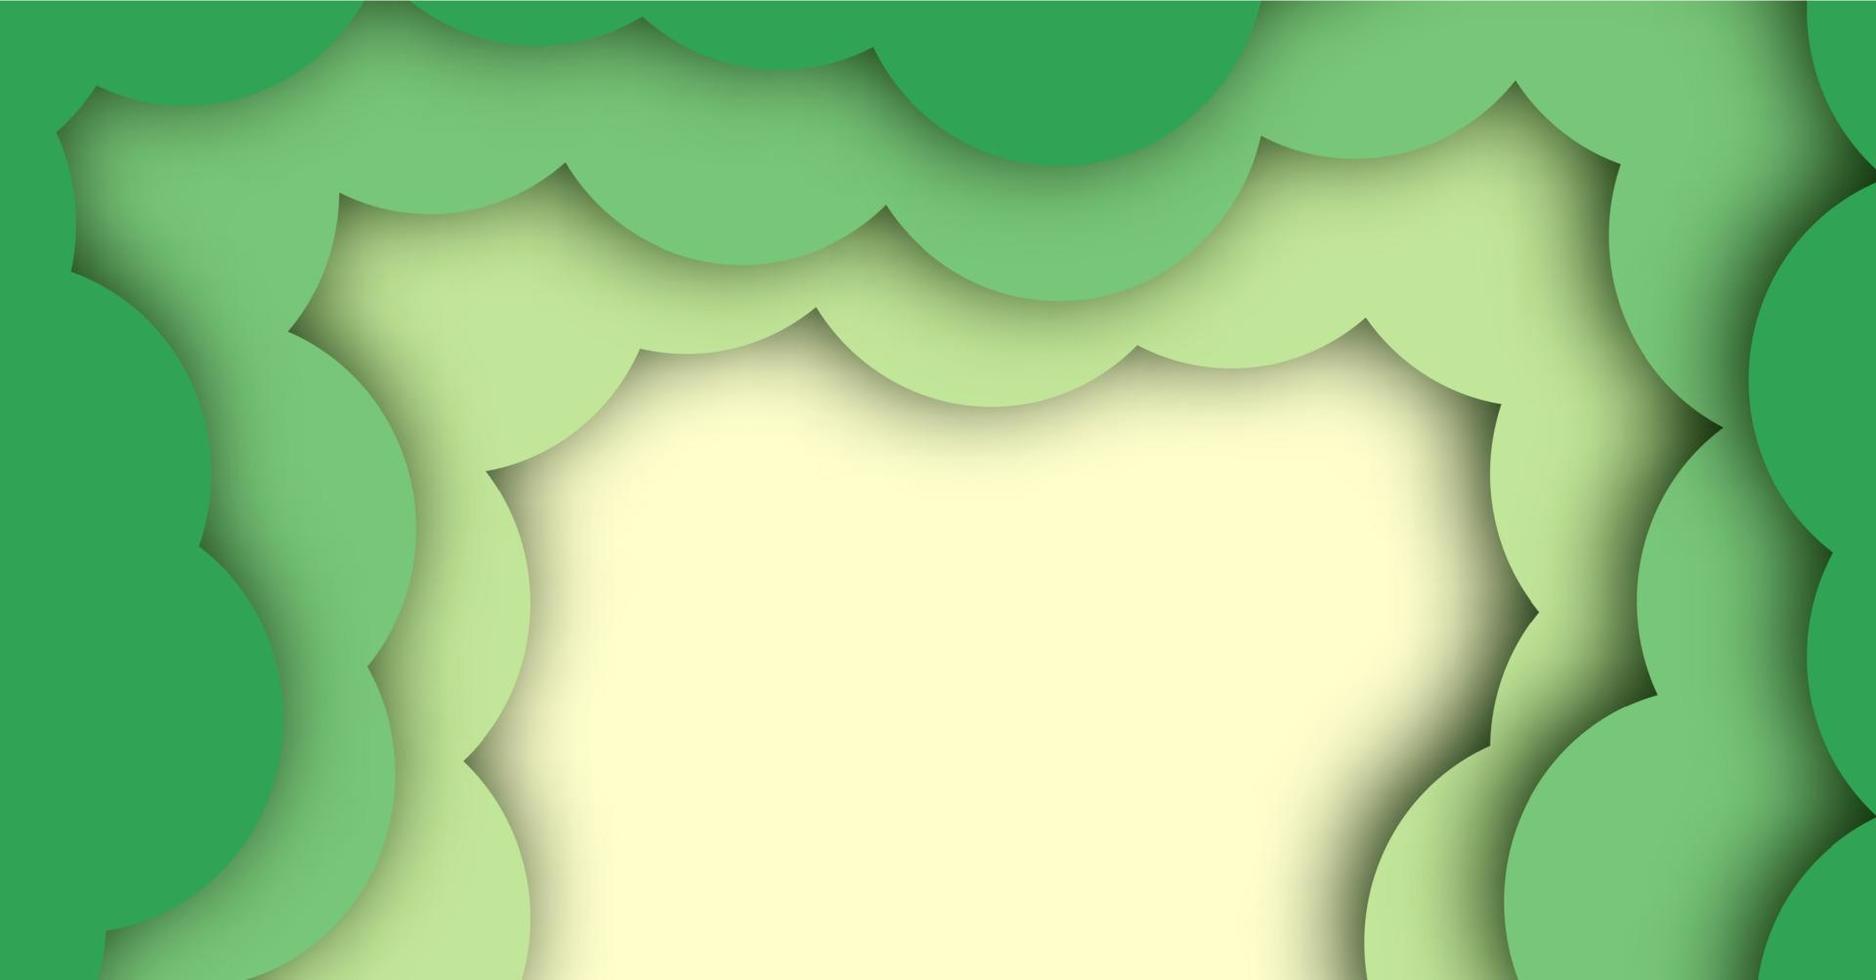 Abstract Background with Green Paper Cut shapes banner design. Vector illustration